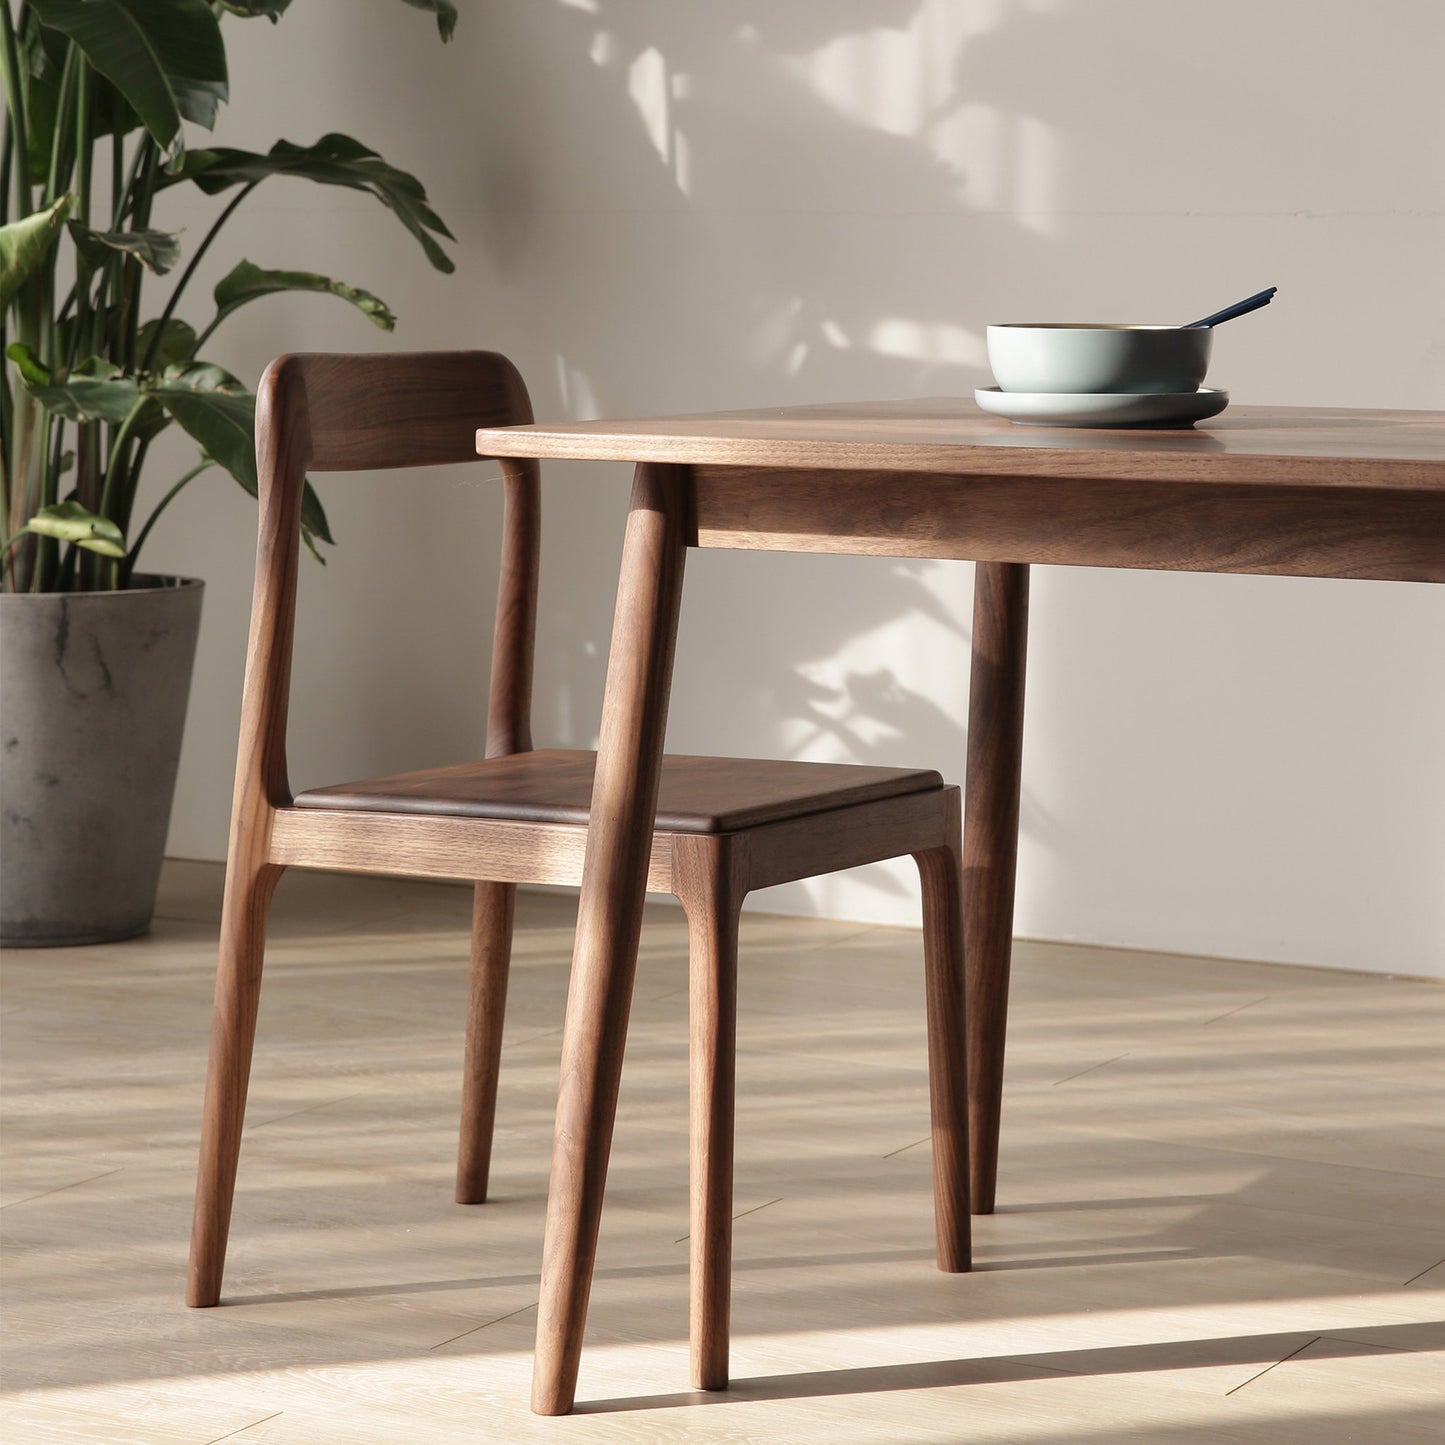 SIMPLY Square Dining Table 實木餐枱